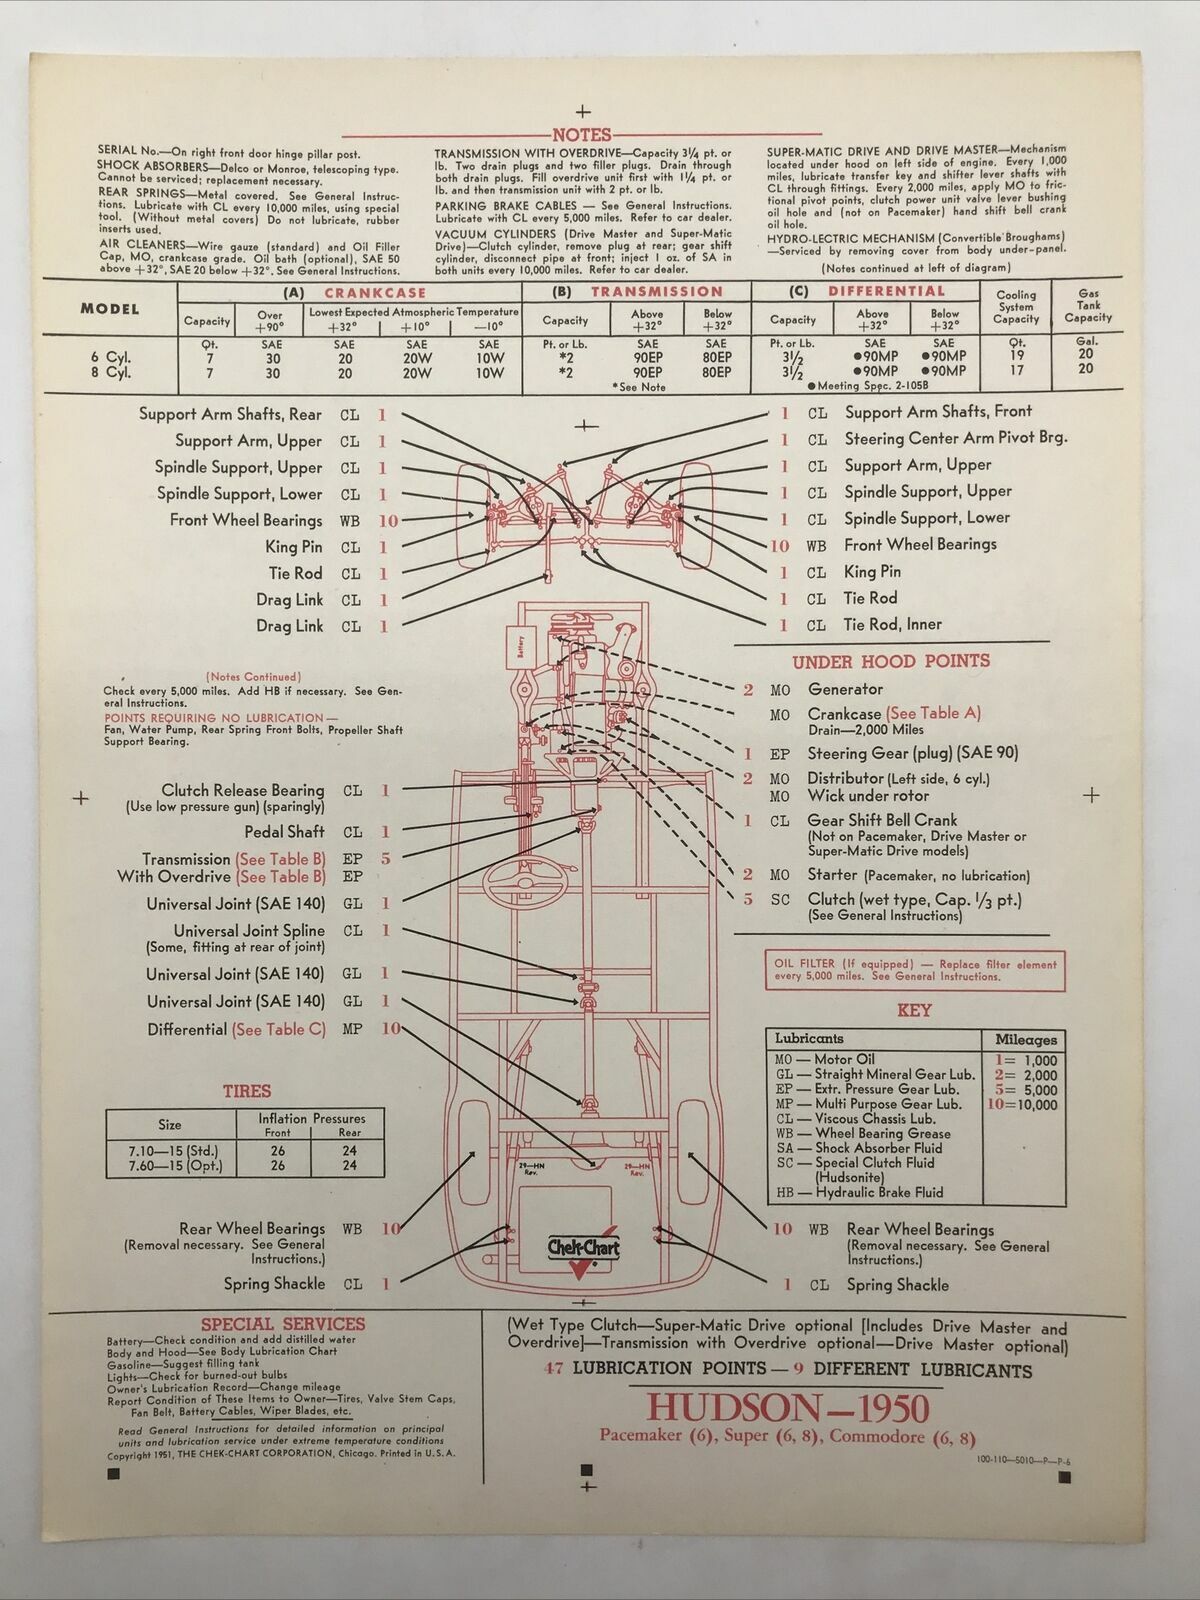 1950 HUDSON Pacemaker, Super, Commodore Chek-Chart Lubrication Specs